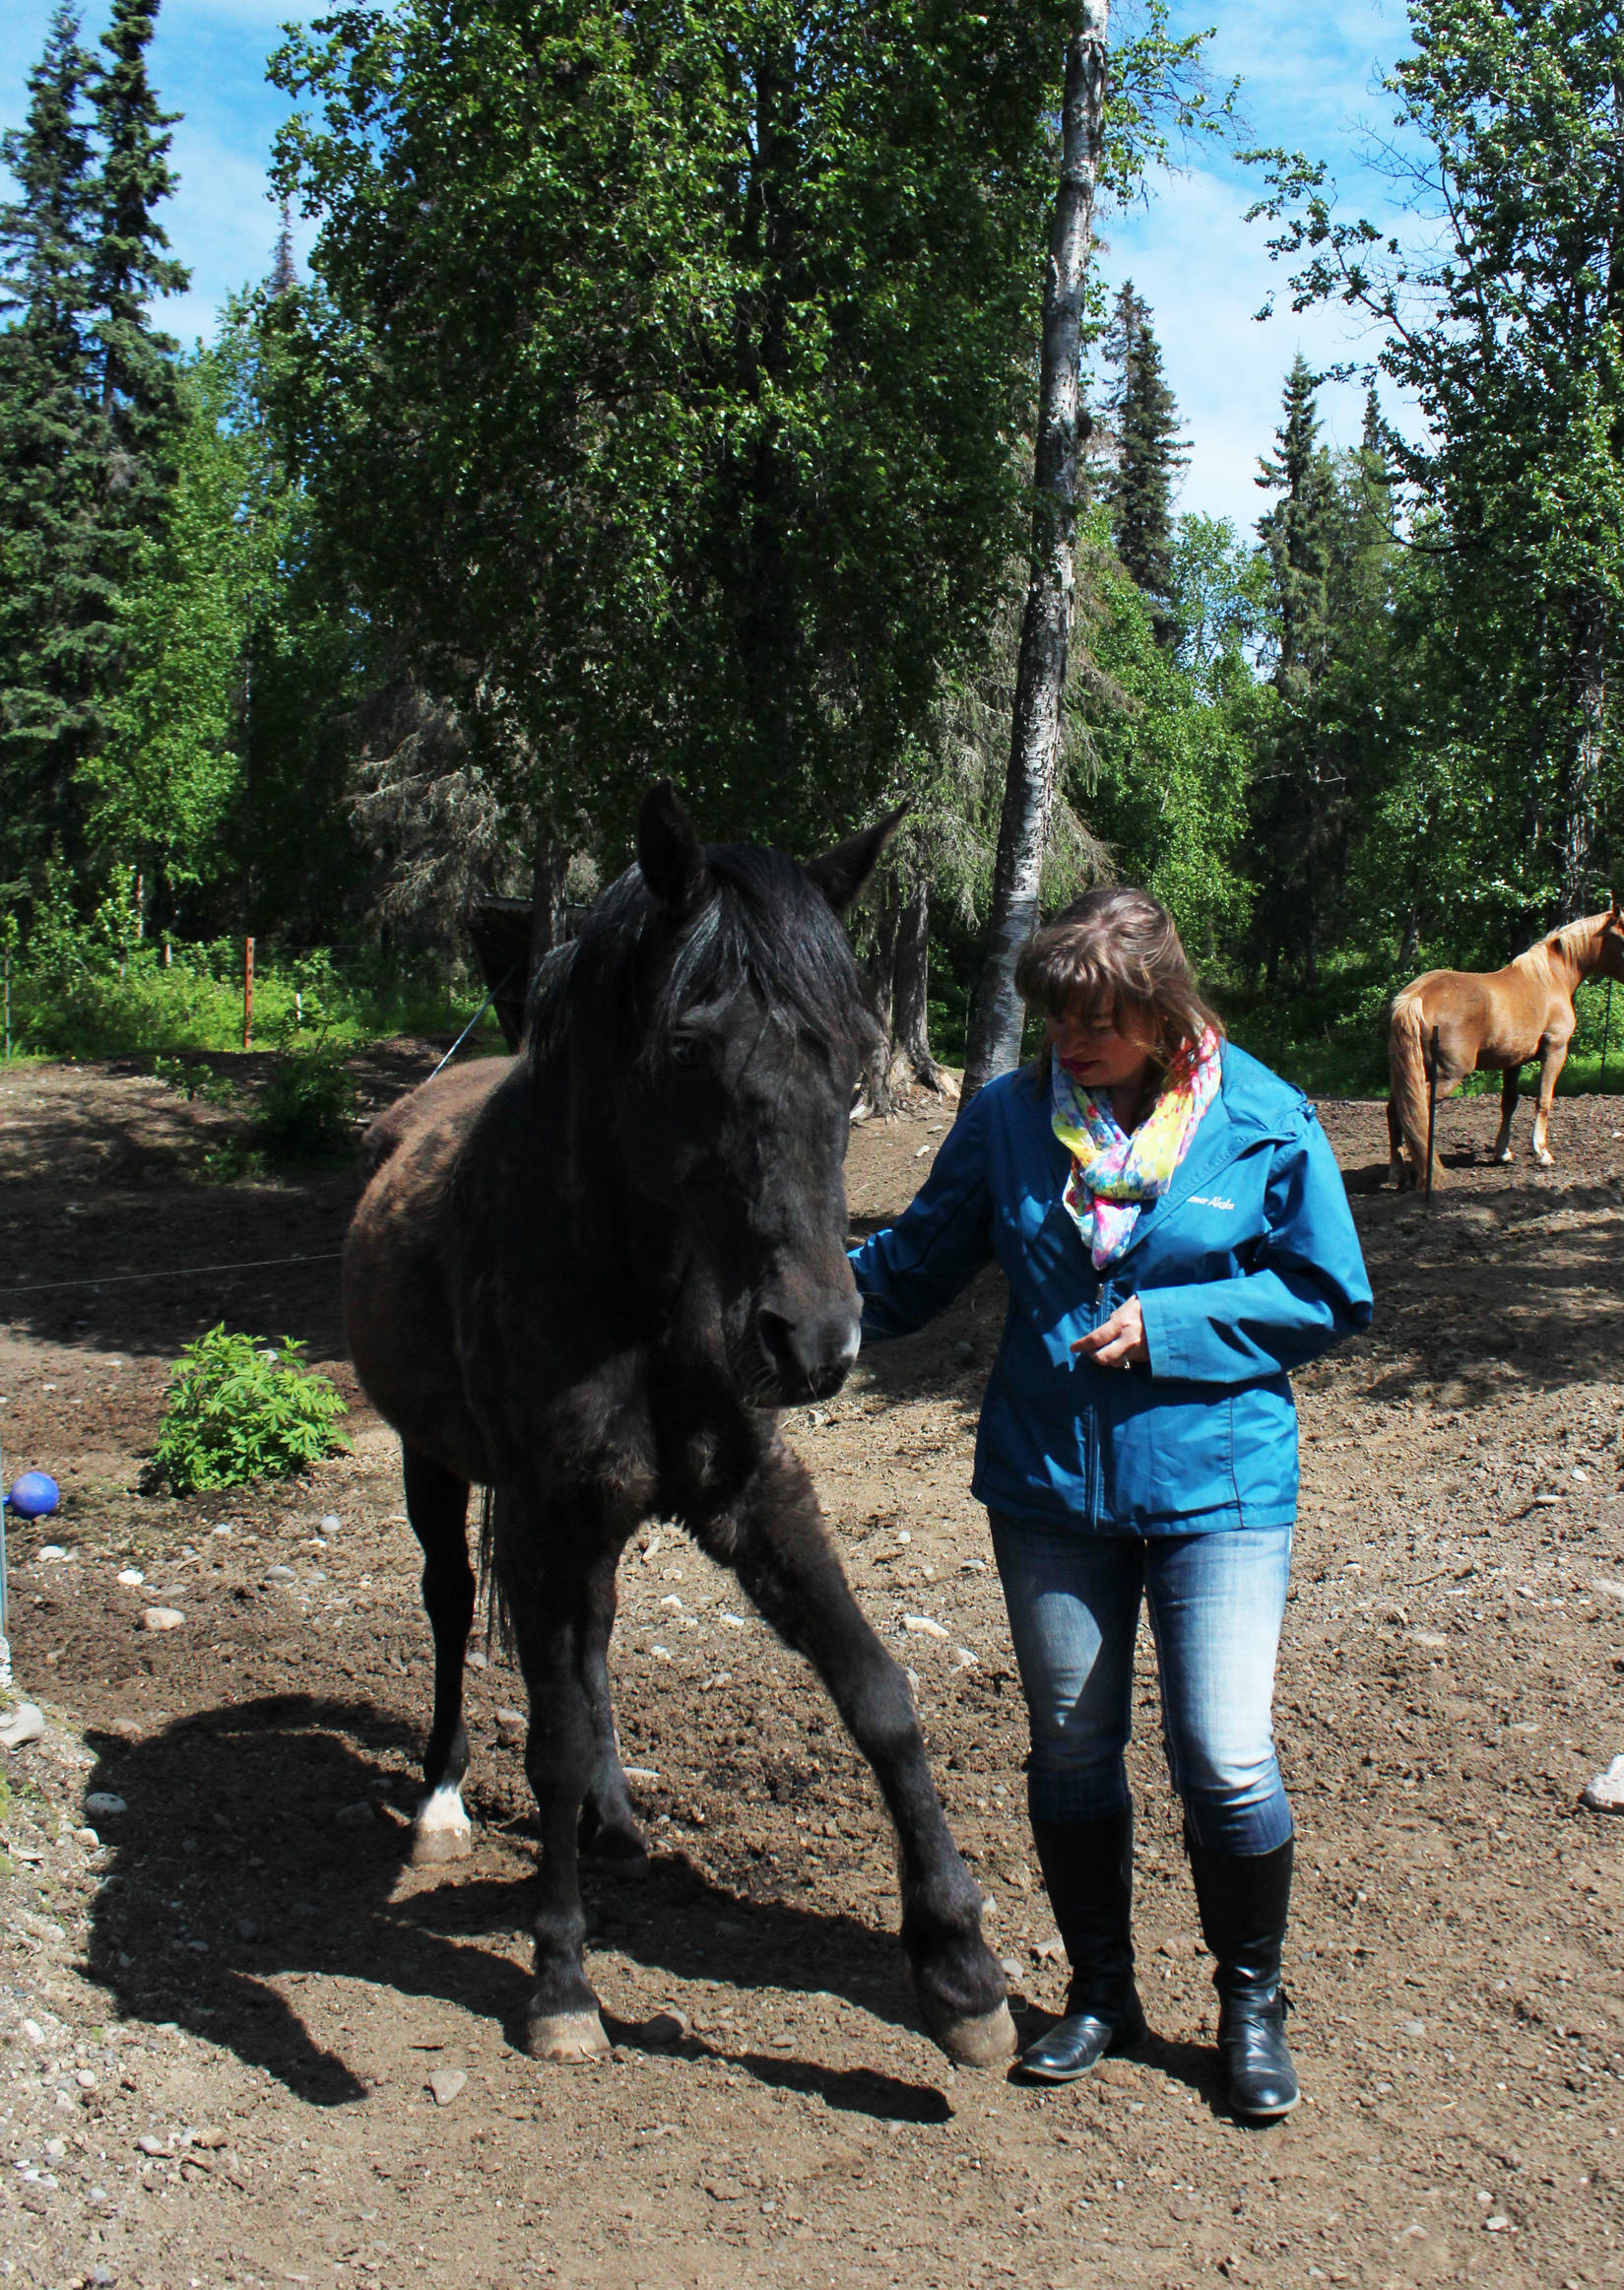 Geri Litzen coaxes her horse Duvall into performing a trick at her home Wednesday, June 14, 2017 in Nikiski, Alaska. Litzen recently started an equine therapy business in which she offers sessions and activities with her five horses. (Megan Pacer/Peninsula Clarion)